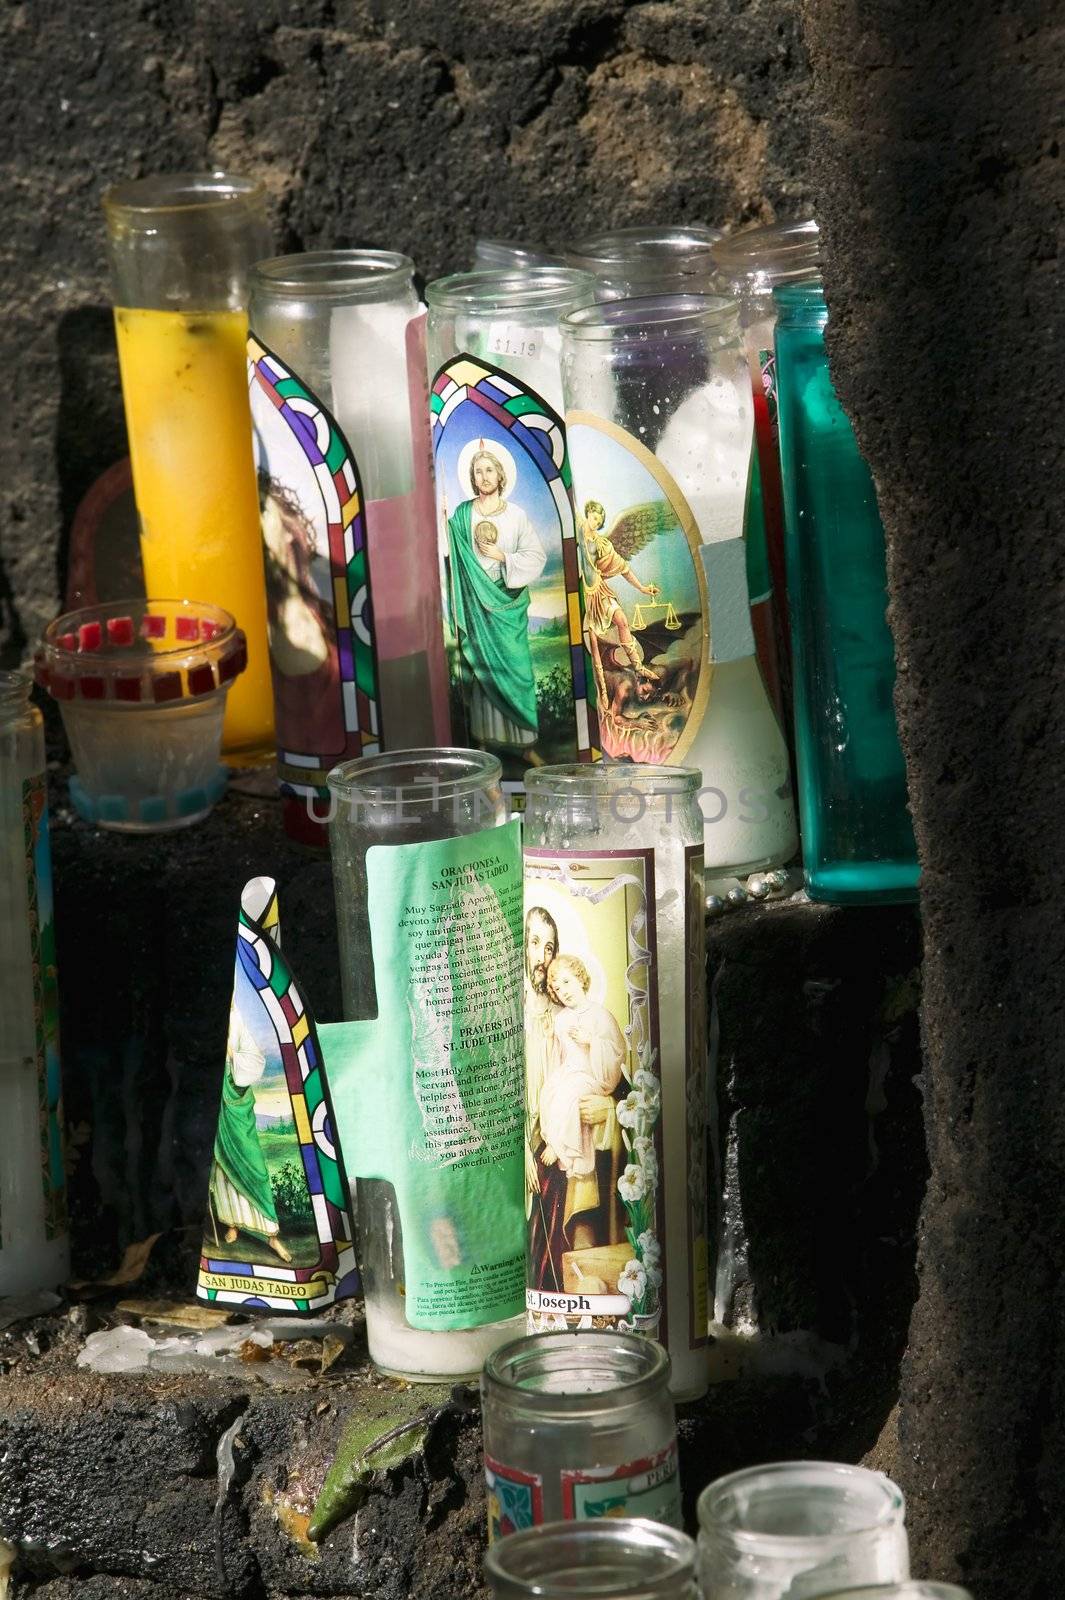 Catholic devotional candles on an outdoor stone altar